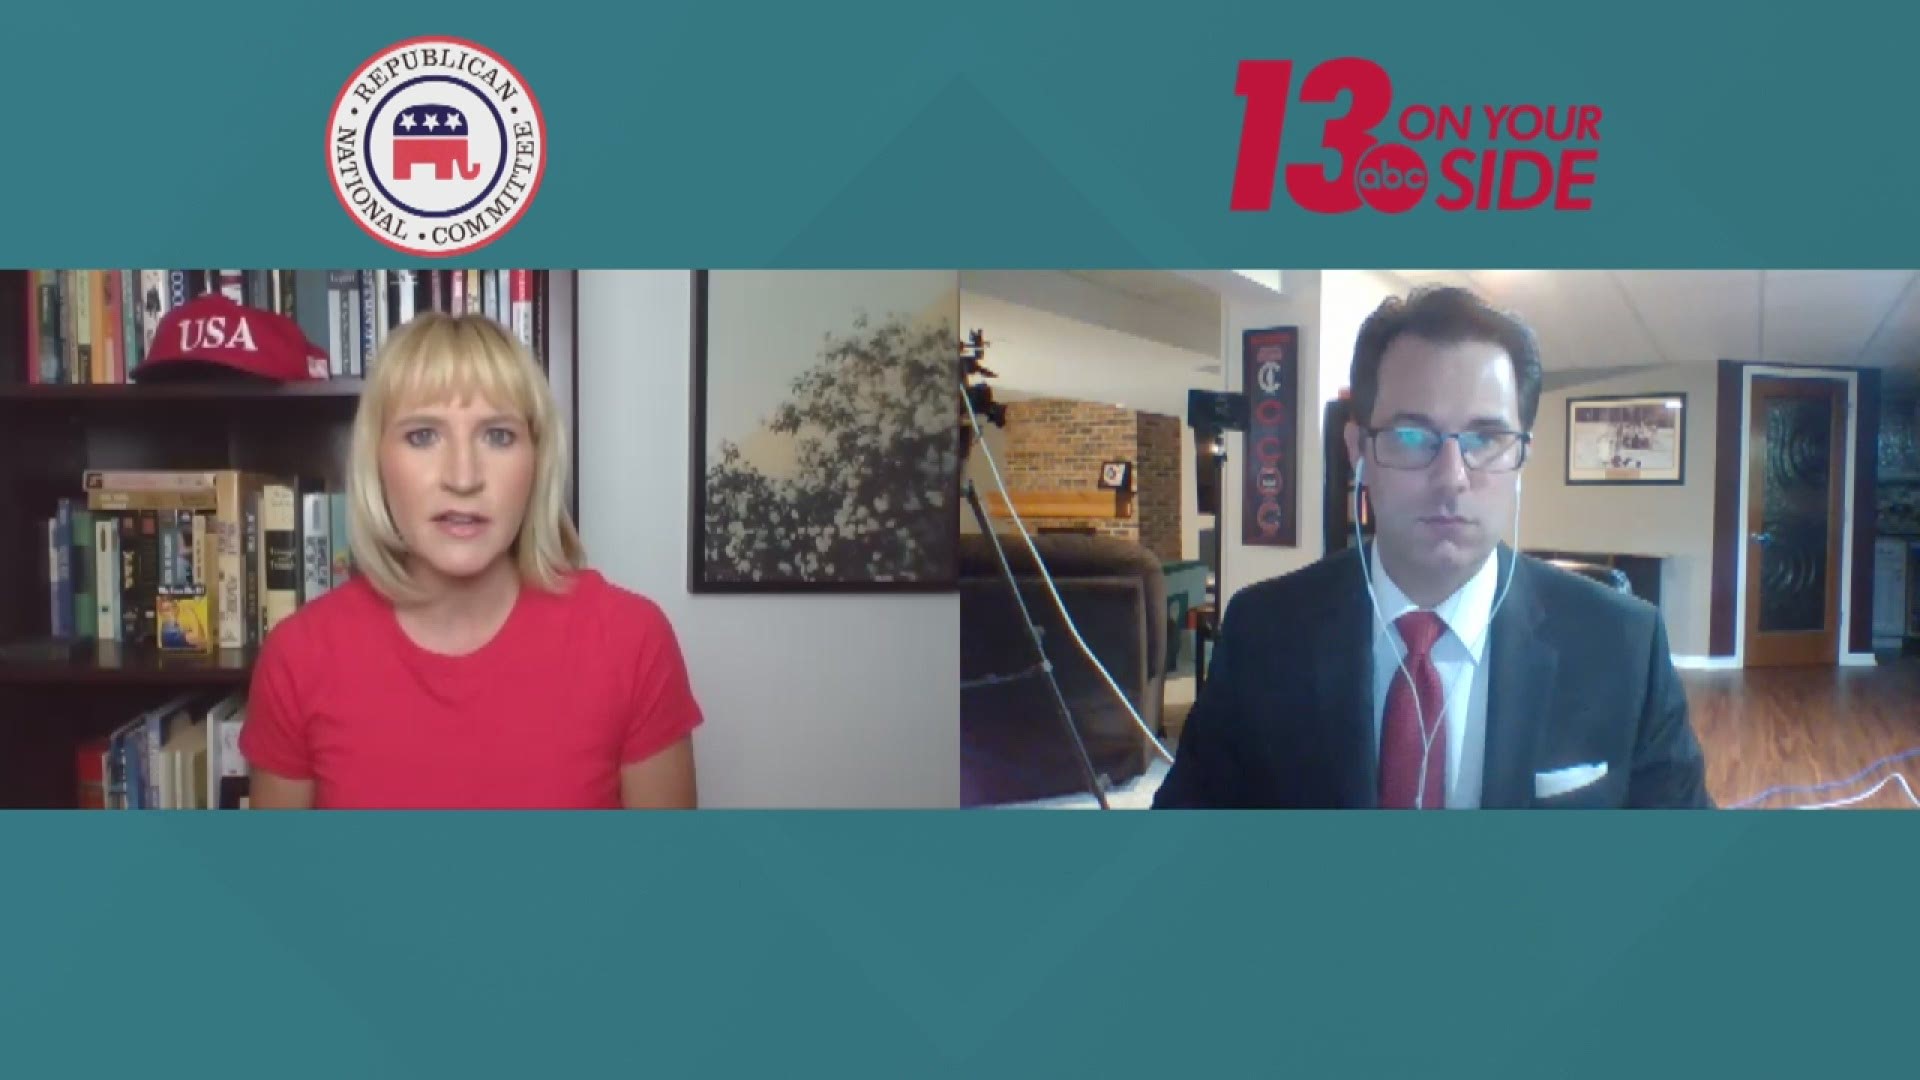 13 ON YOUR SIDE'S Nick LaFave discusses unemployment and jobs numbers with RNC spokesperson Liz Harrington.